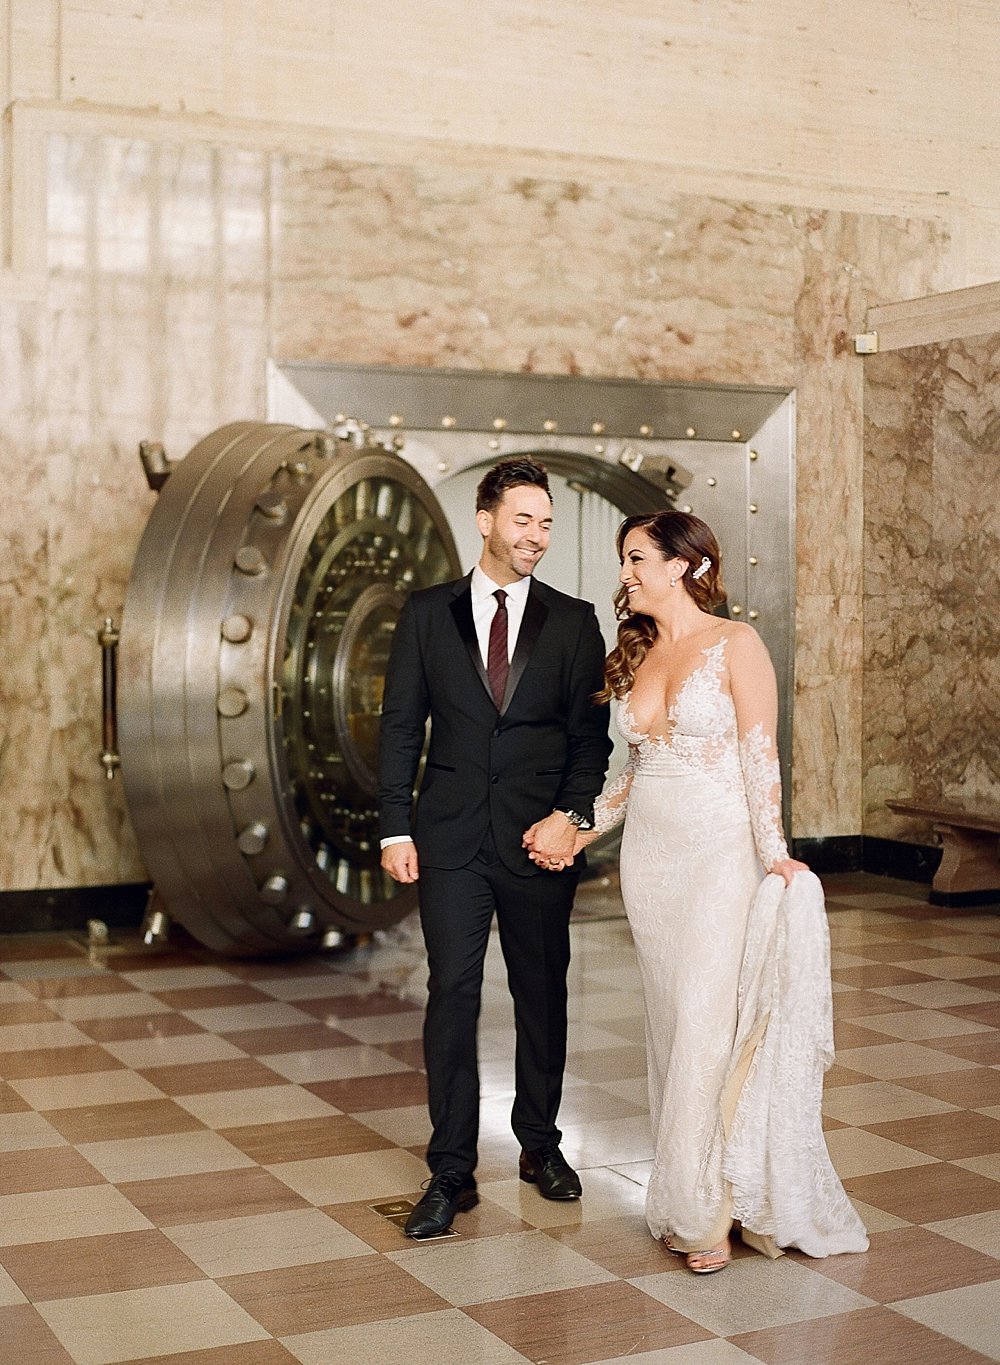 This moody and eclectic wedding at the historical DuPont Building in Miami, Florida is sure to make you swoon.